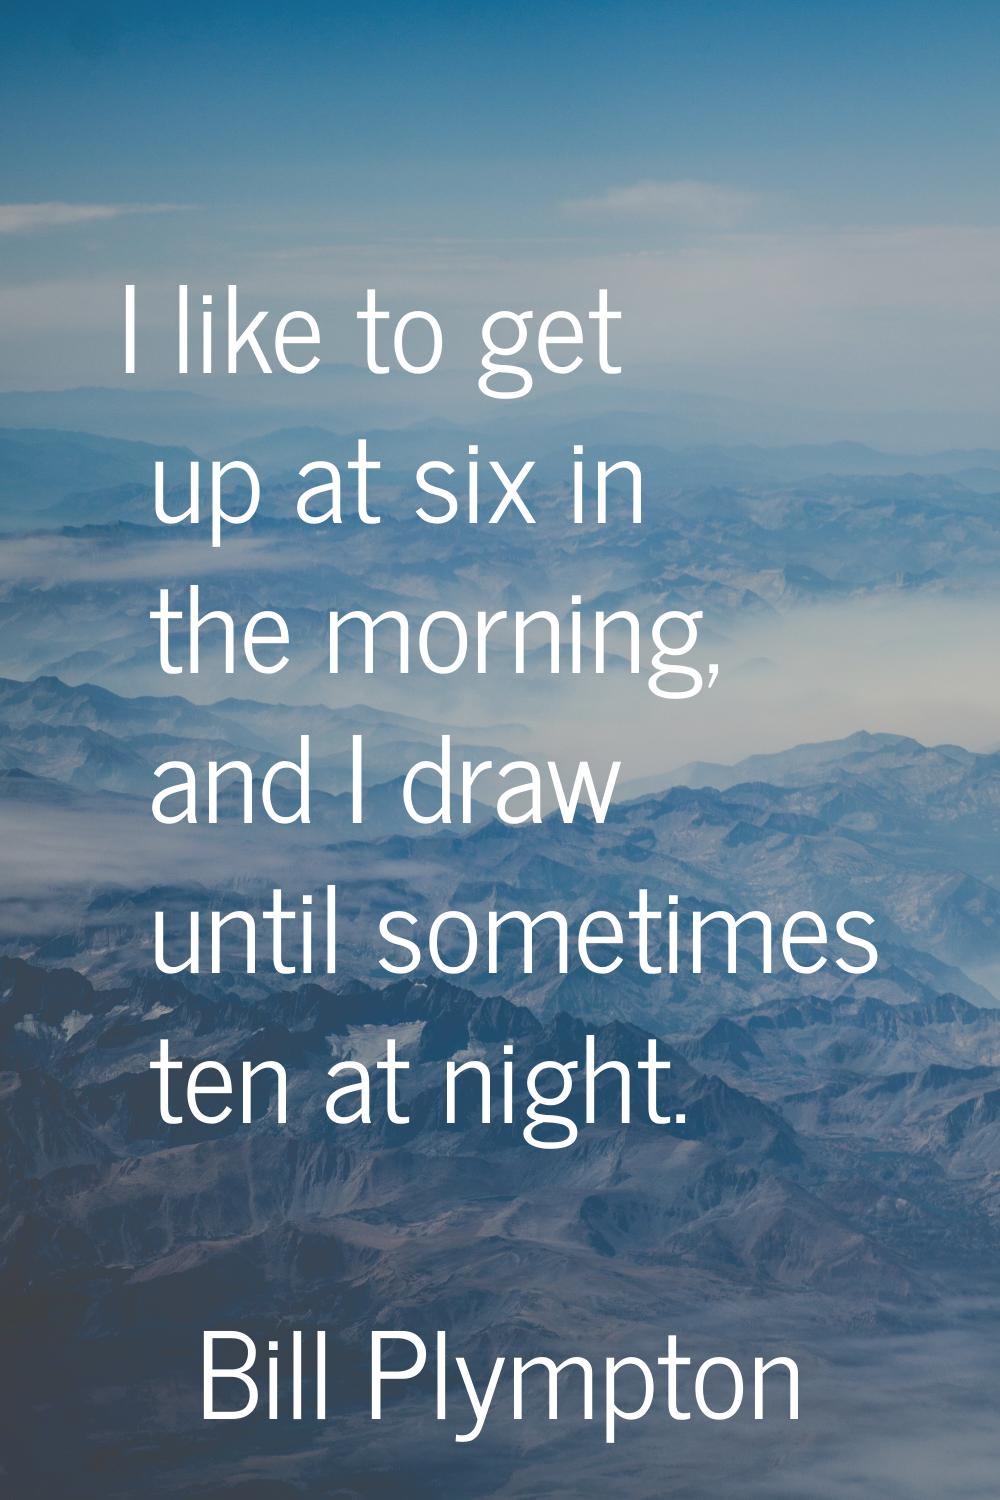 I like to get up at six in the morning, and I draw until sometimes ten at night.